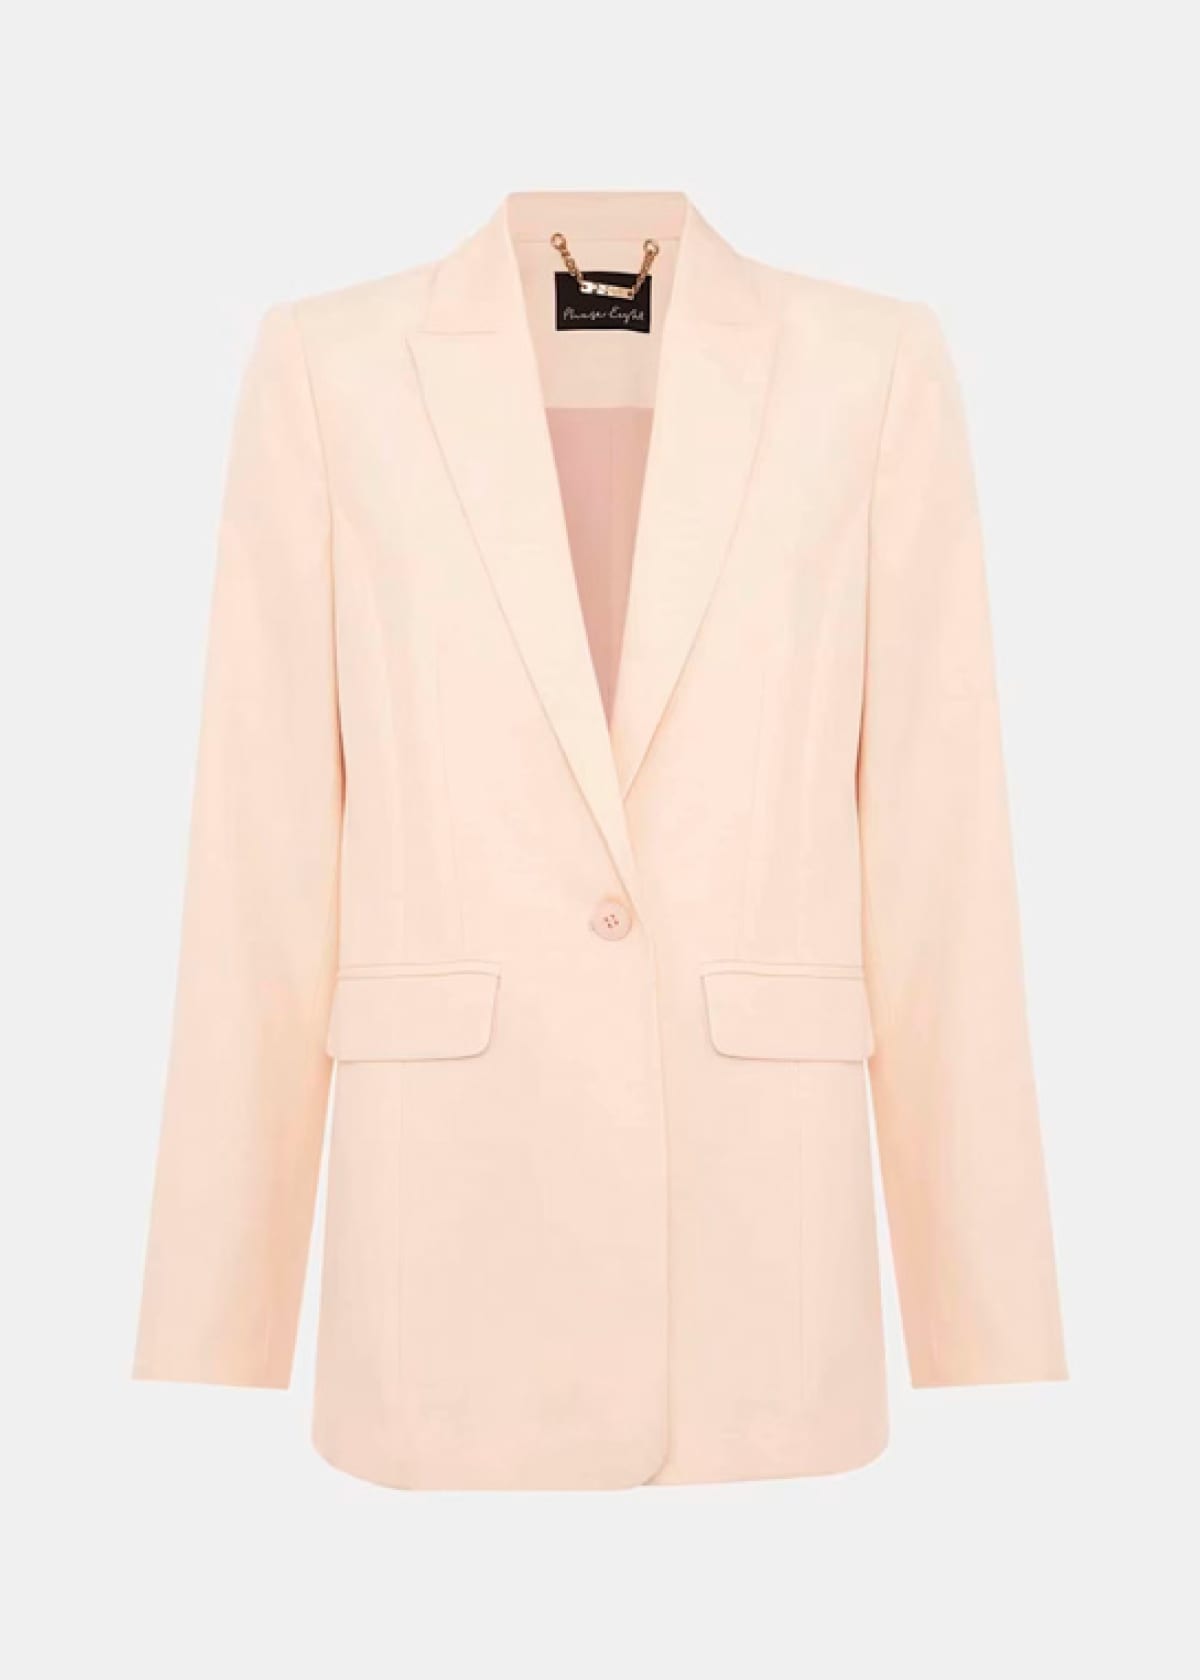 Phase Eight Bianca Peach Suit Jacket